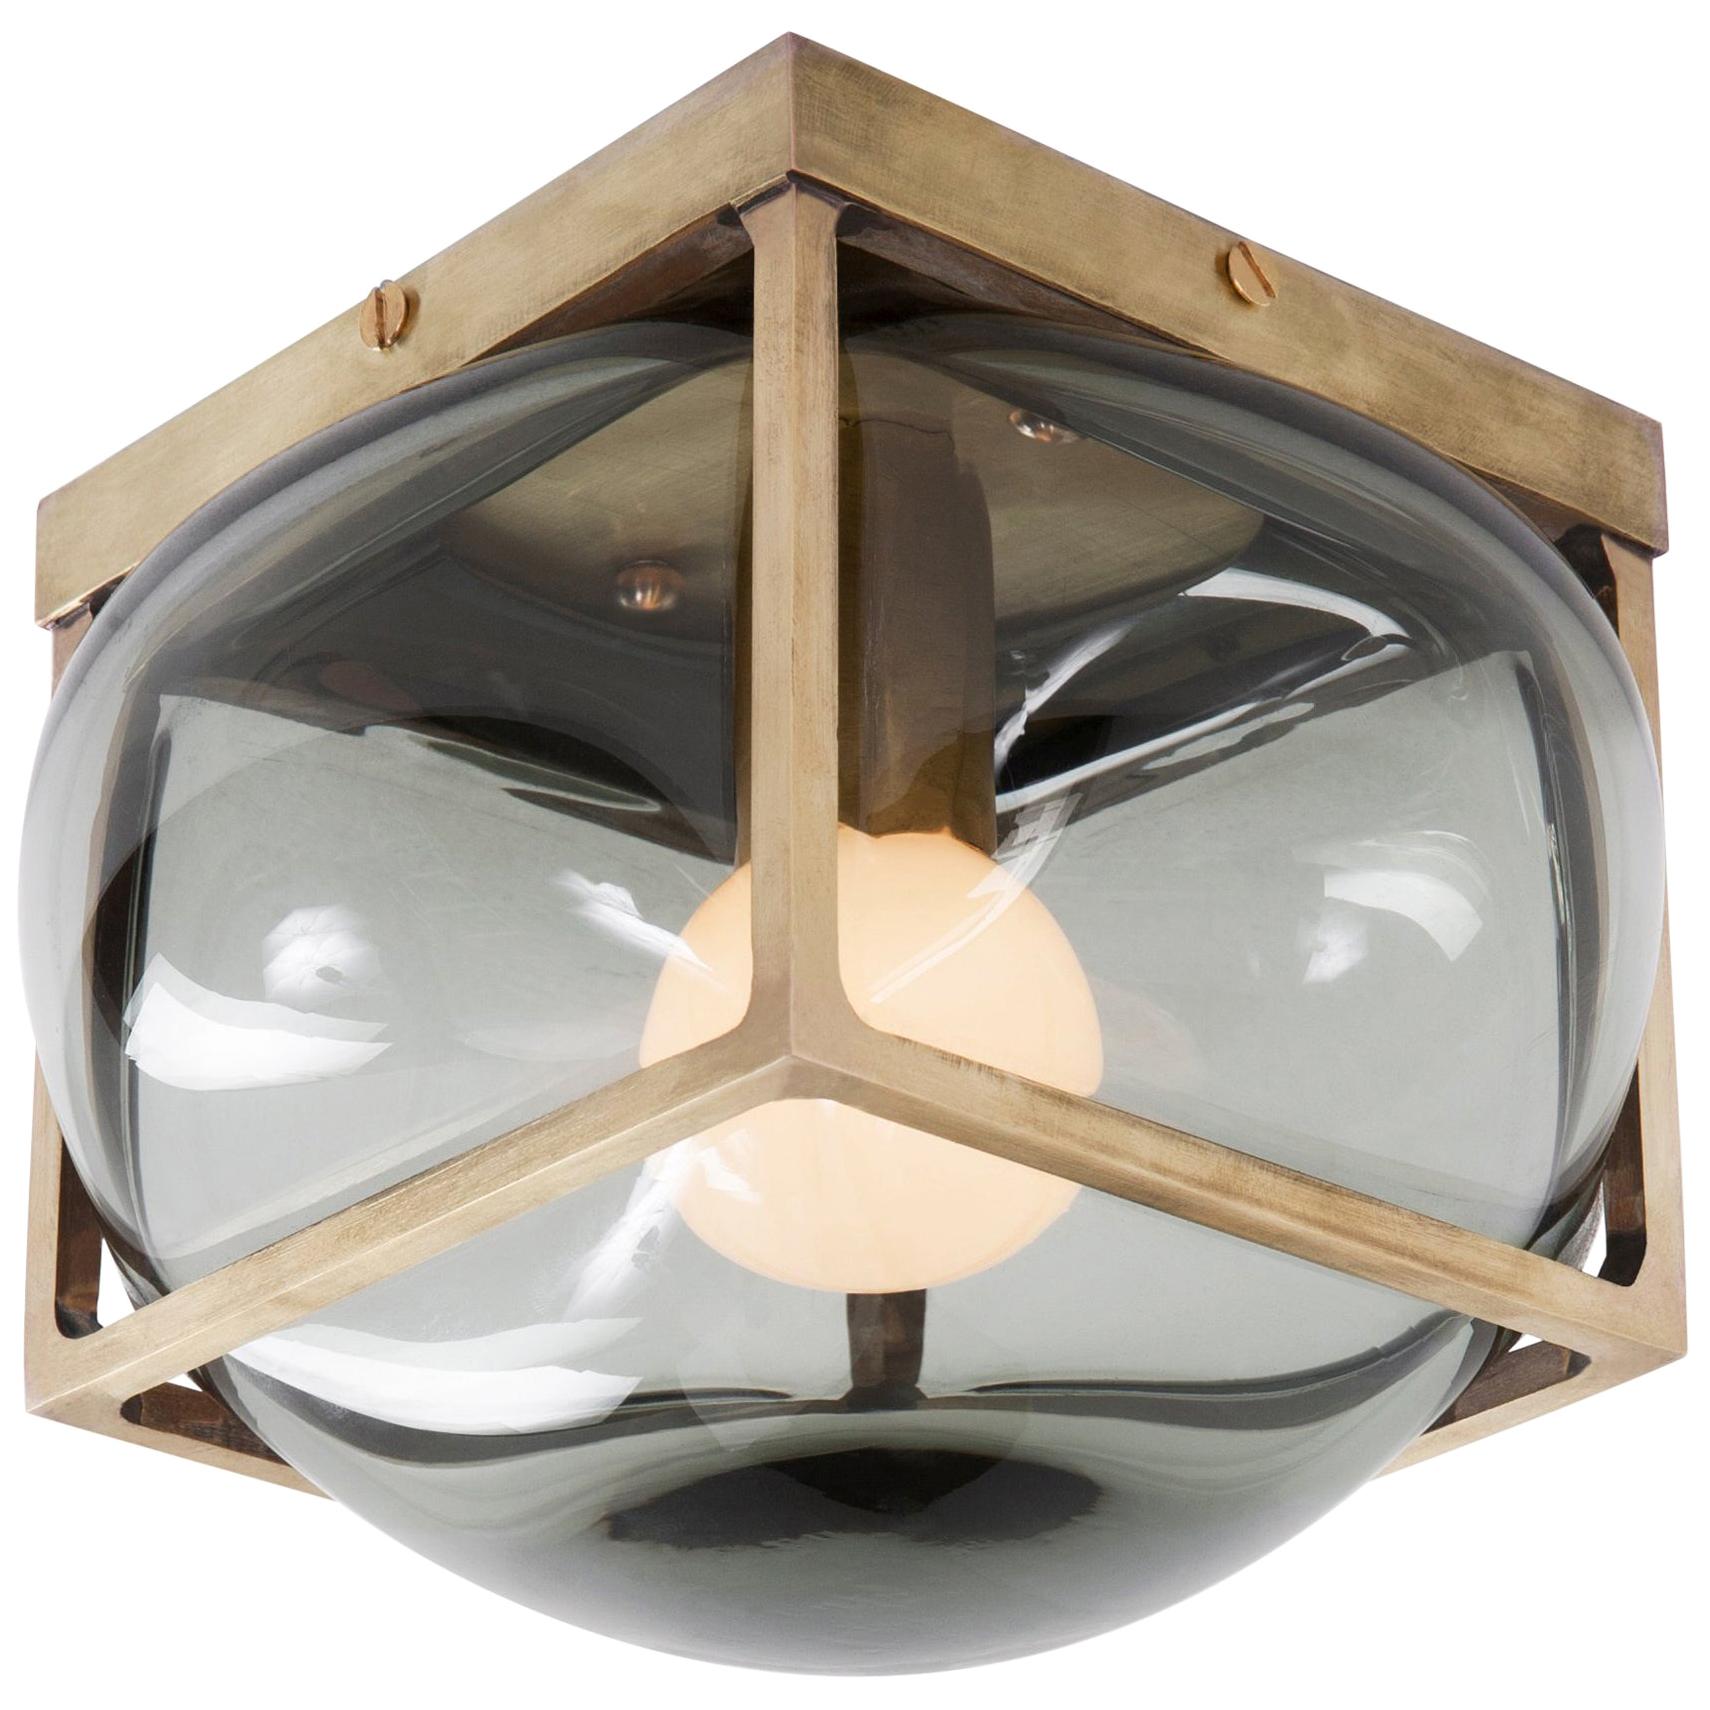 Bulle Light Lg with Handblown Glass in Solid Brass Sconce Flush or Table Fixture